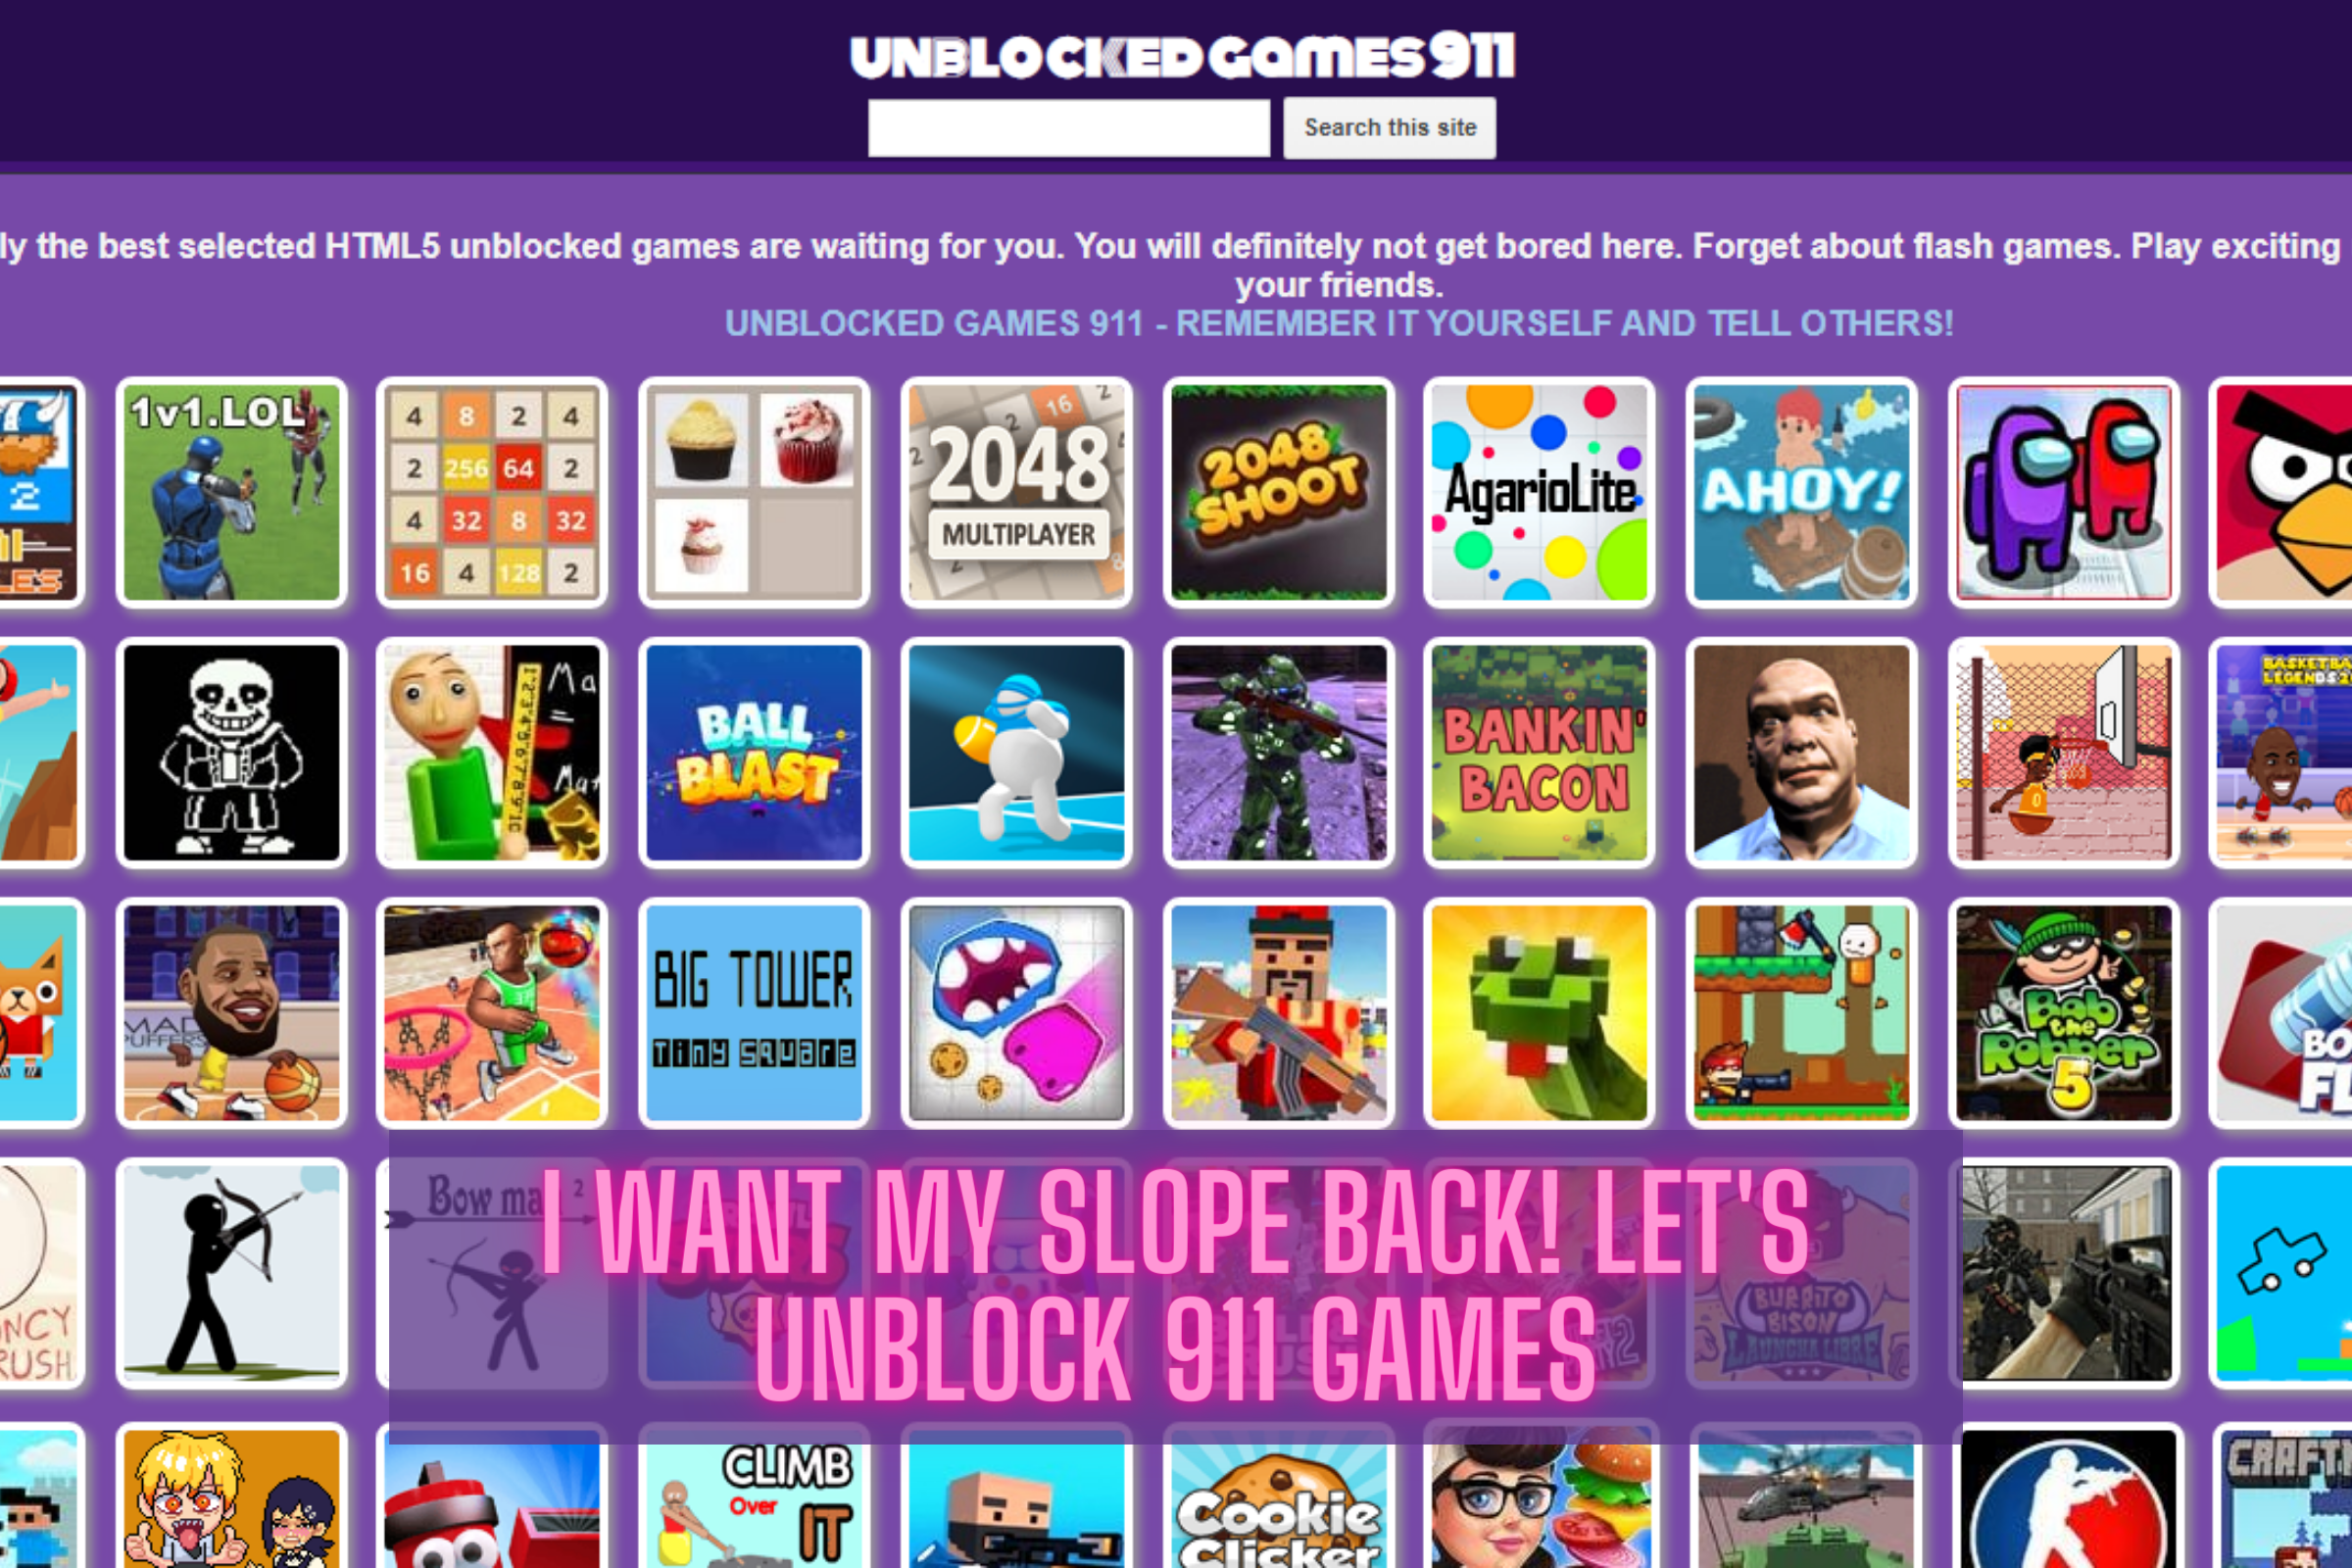 I Want My Slope Back! Let's Unblock 911 Games